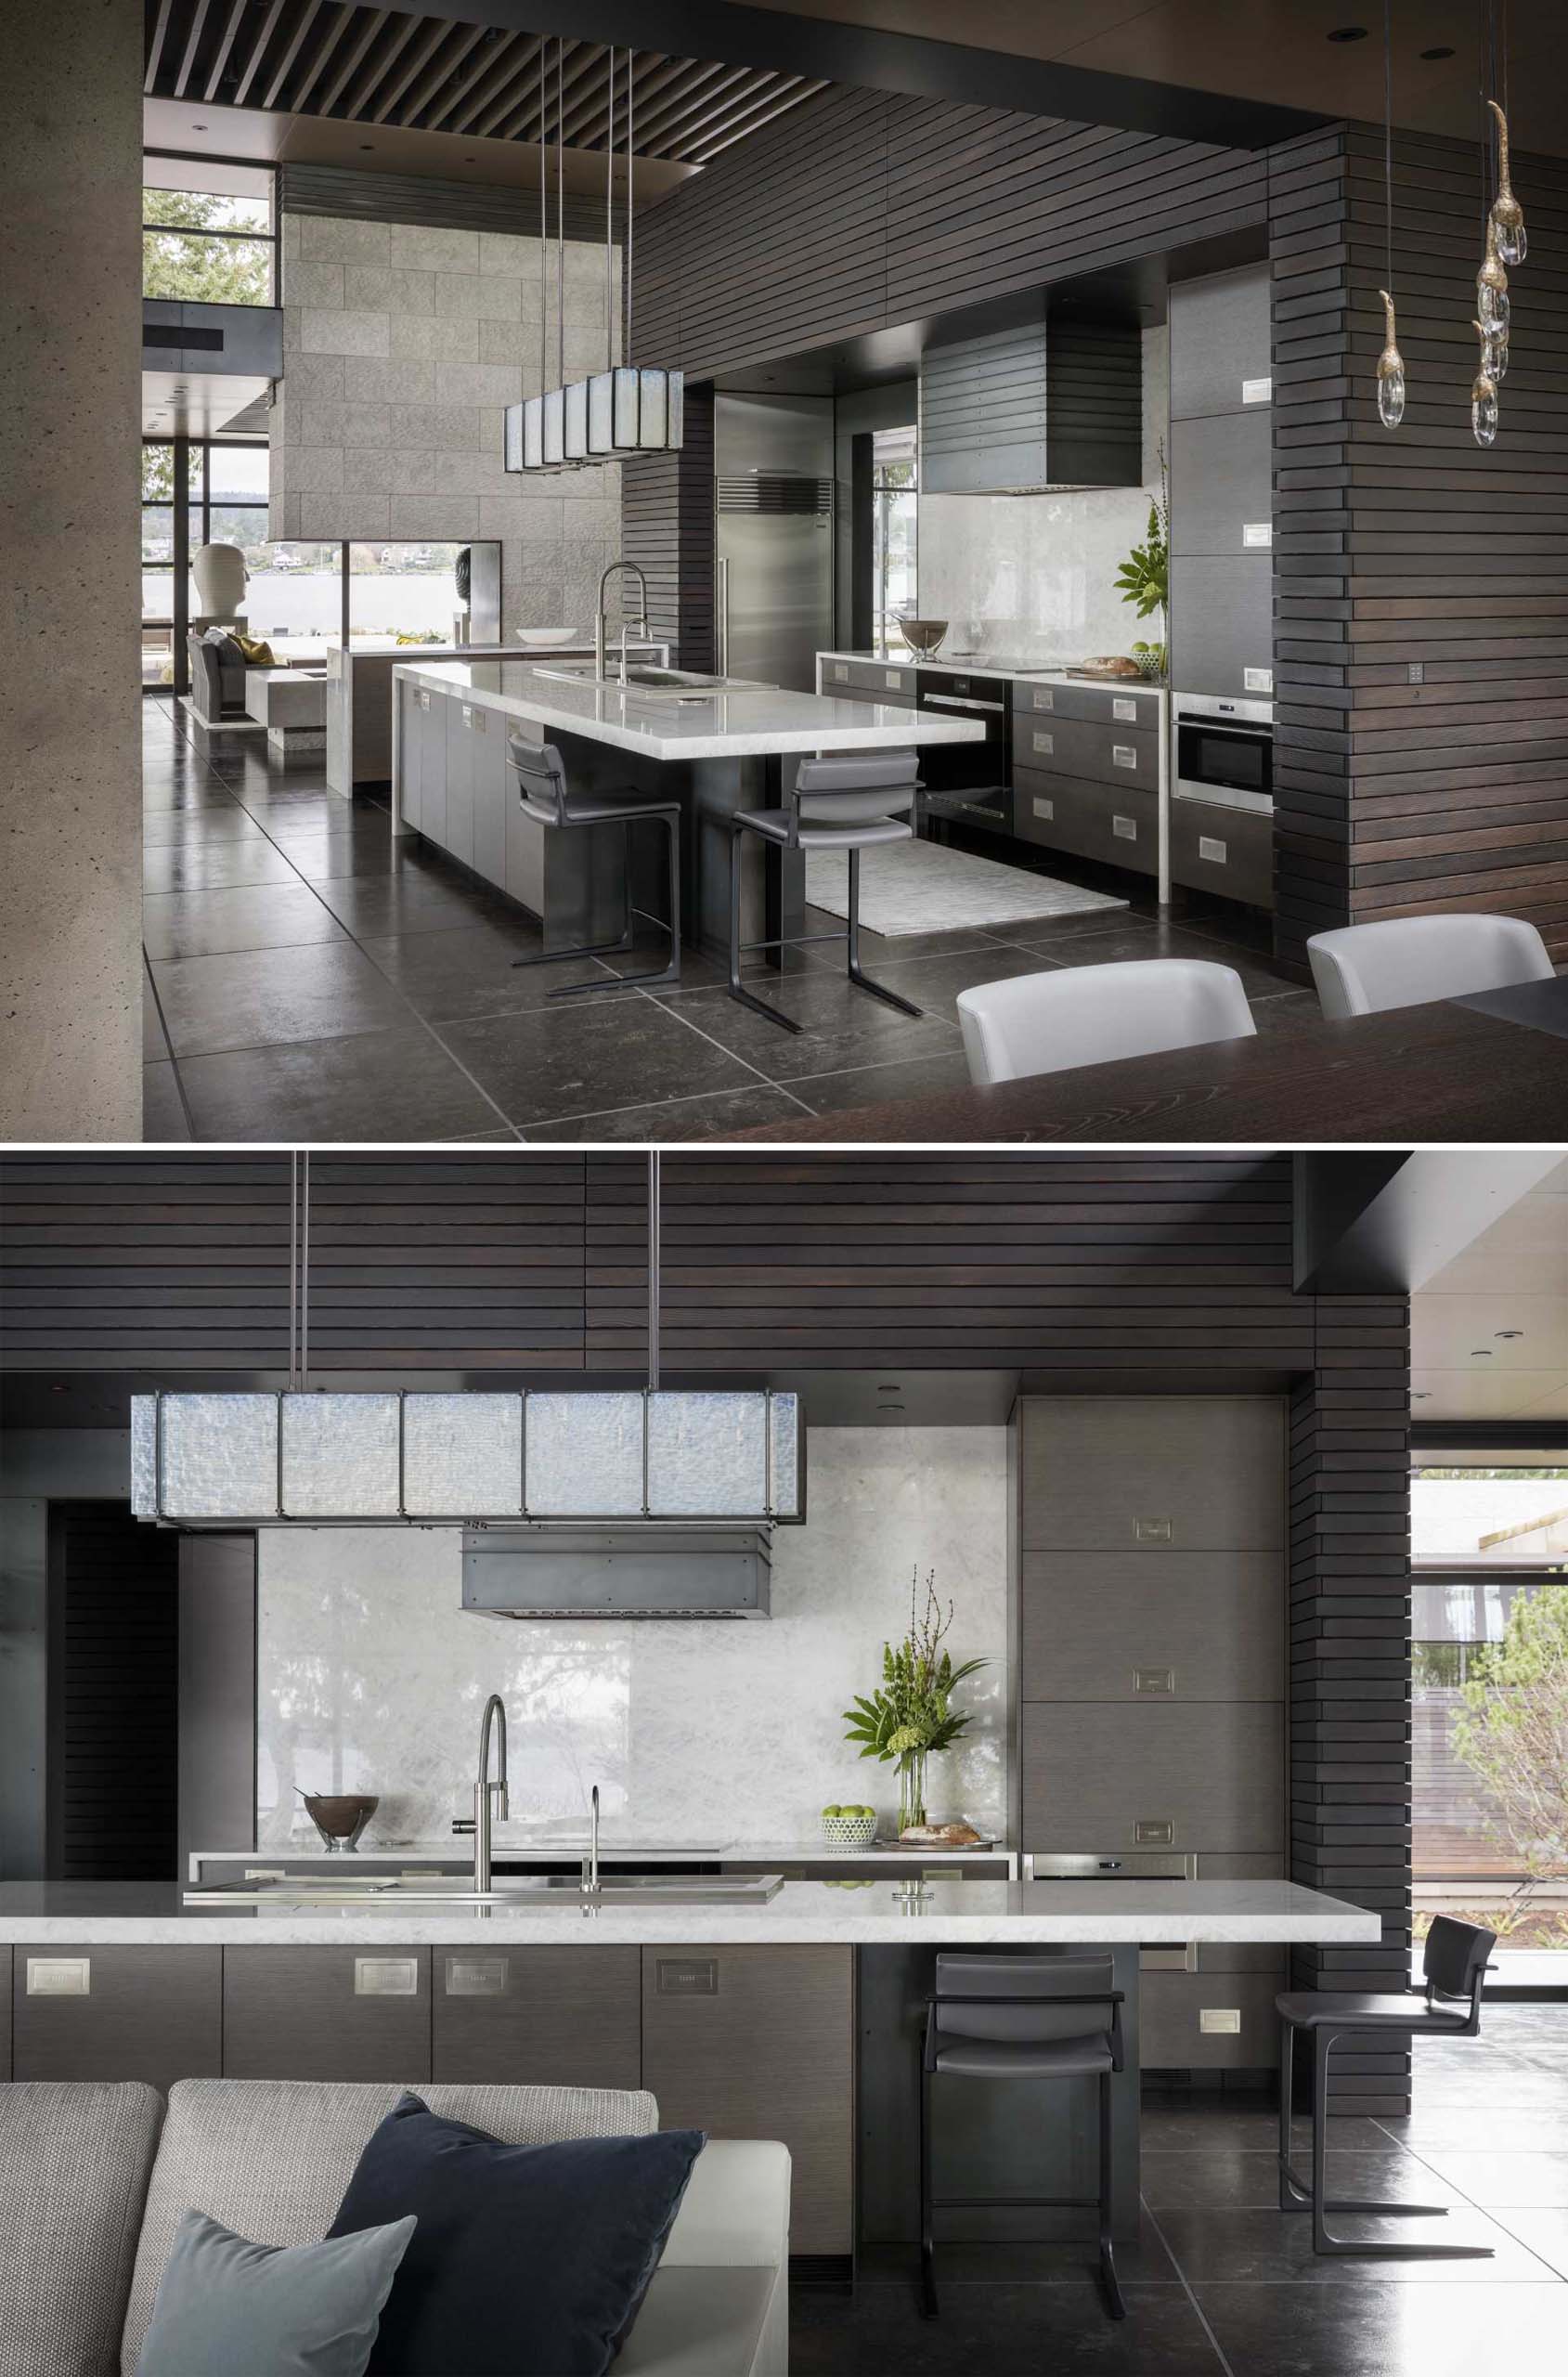 In this modern kitchen, there's a large island and a dark wall accent wall that continues into the dining room.